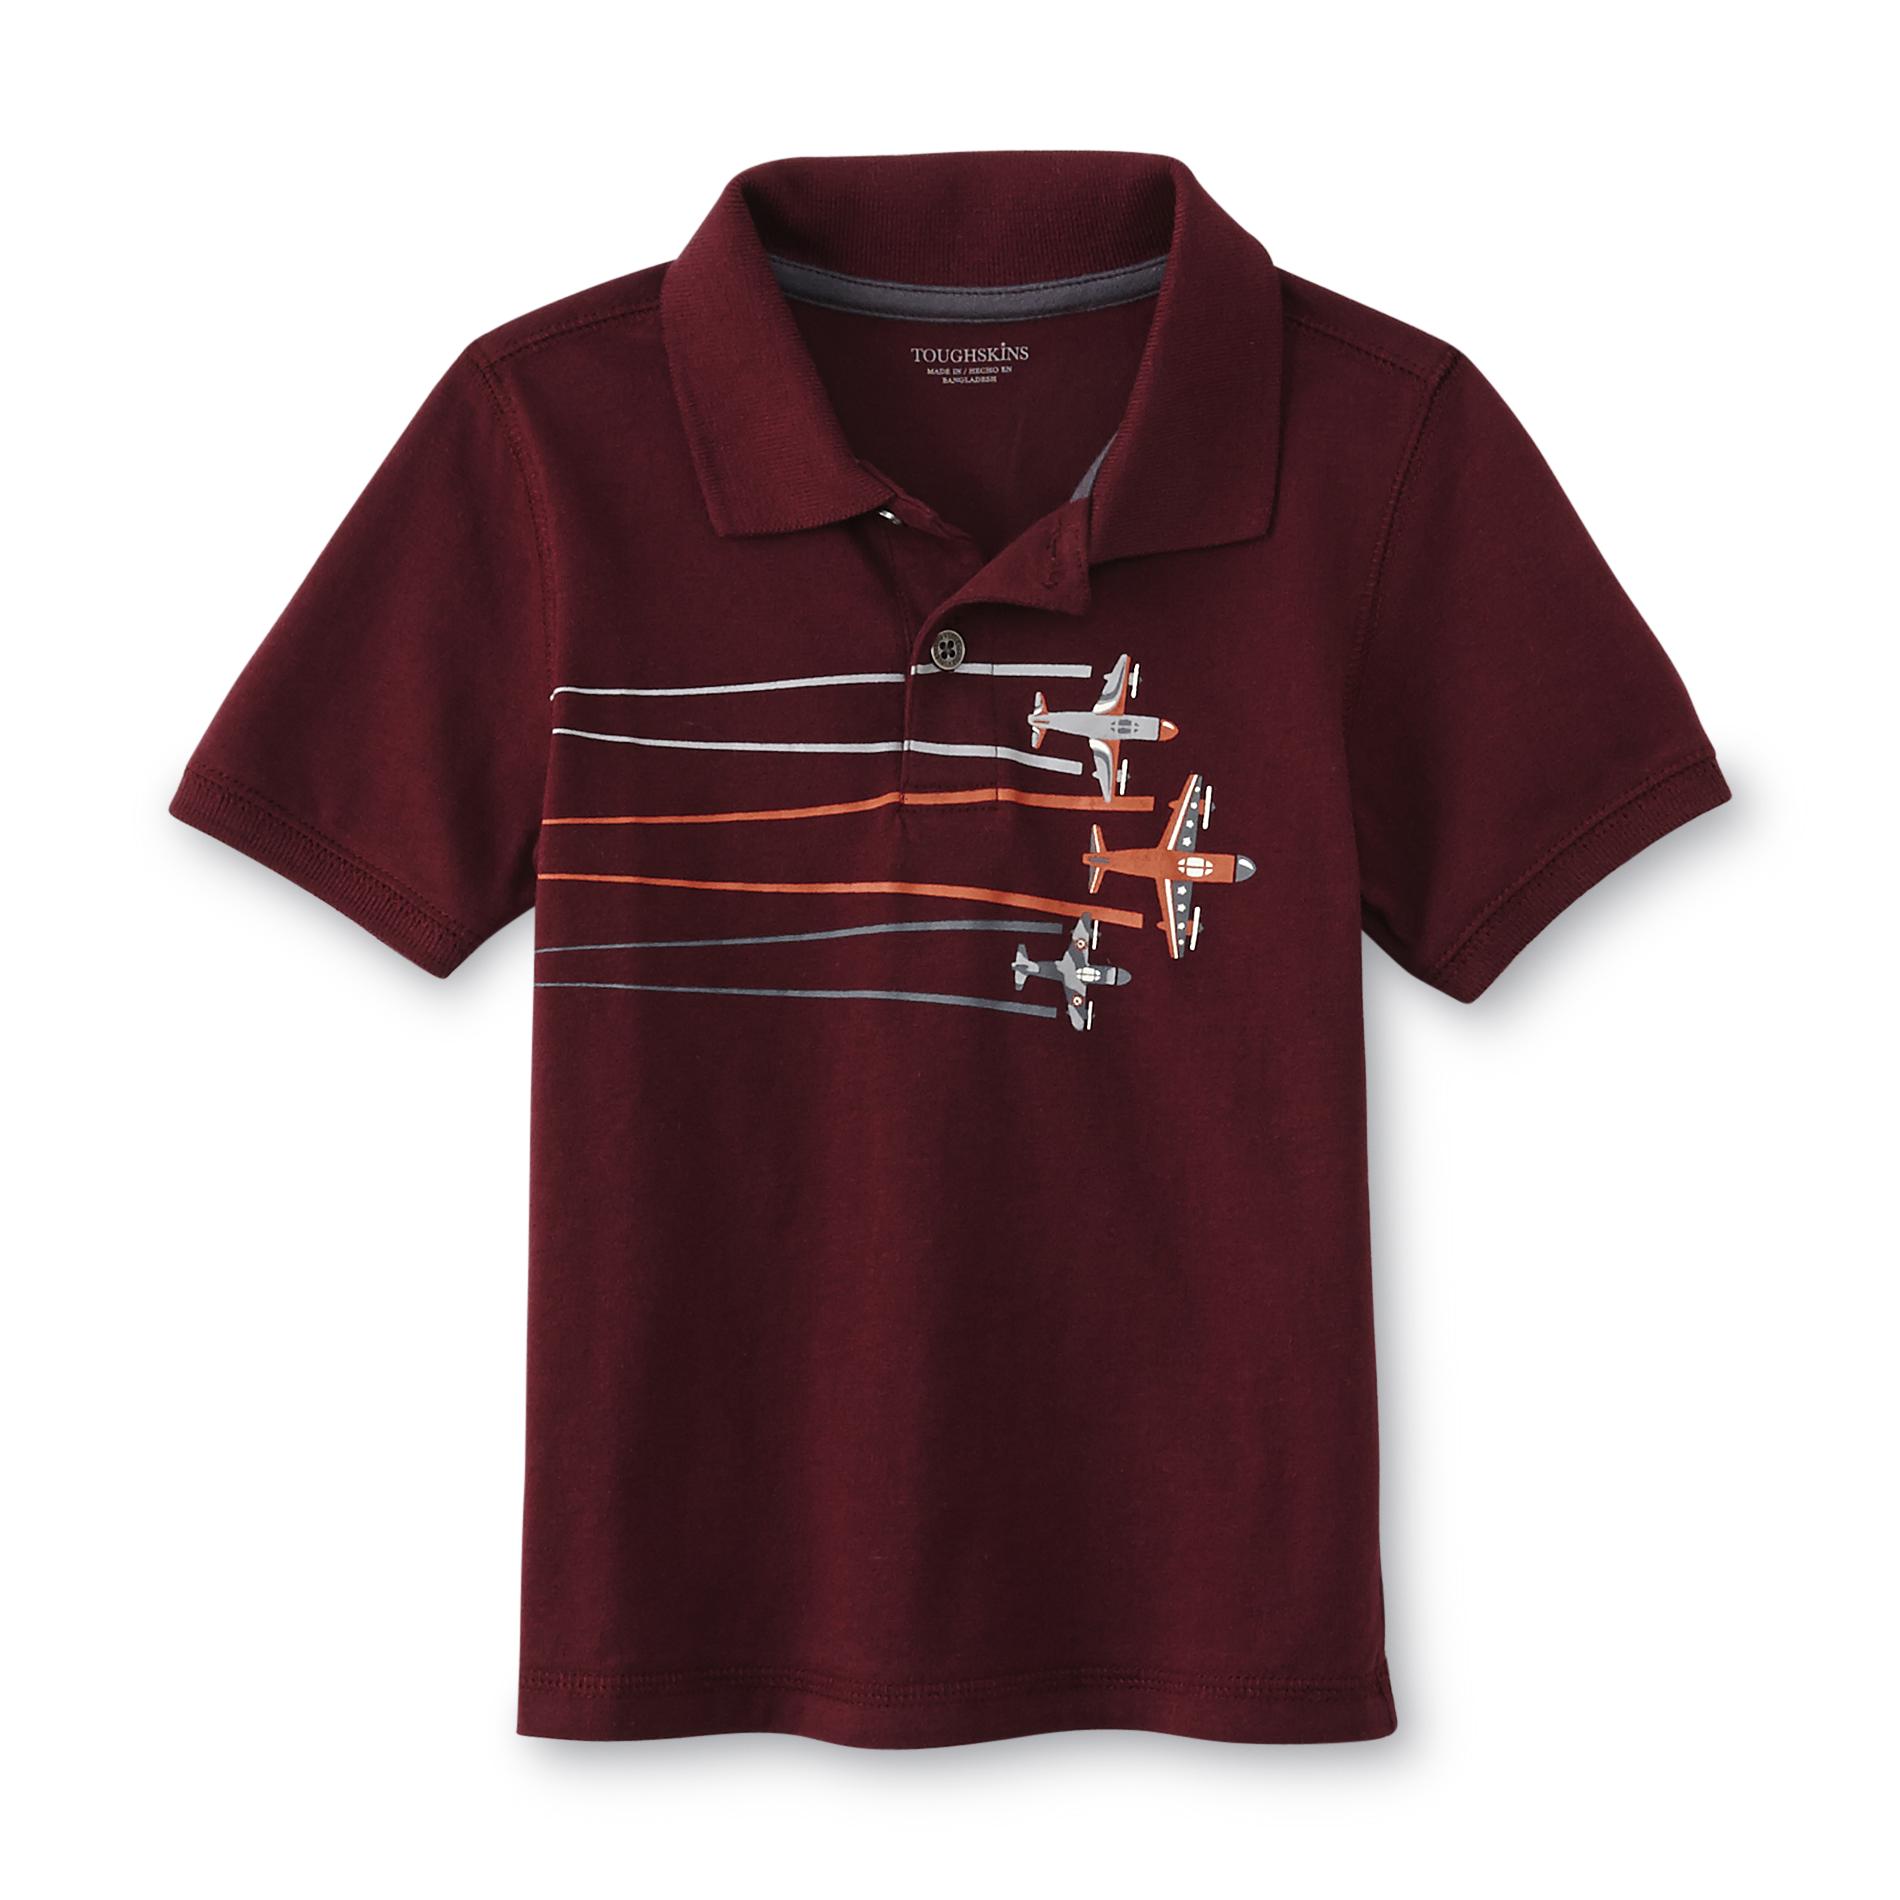 Toughskins Infant & Toddler Boy's Graphic Polo Shirt - Airplanes